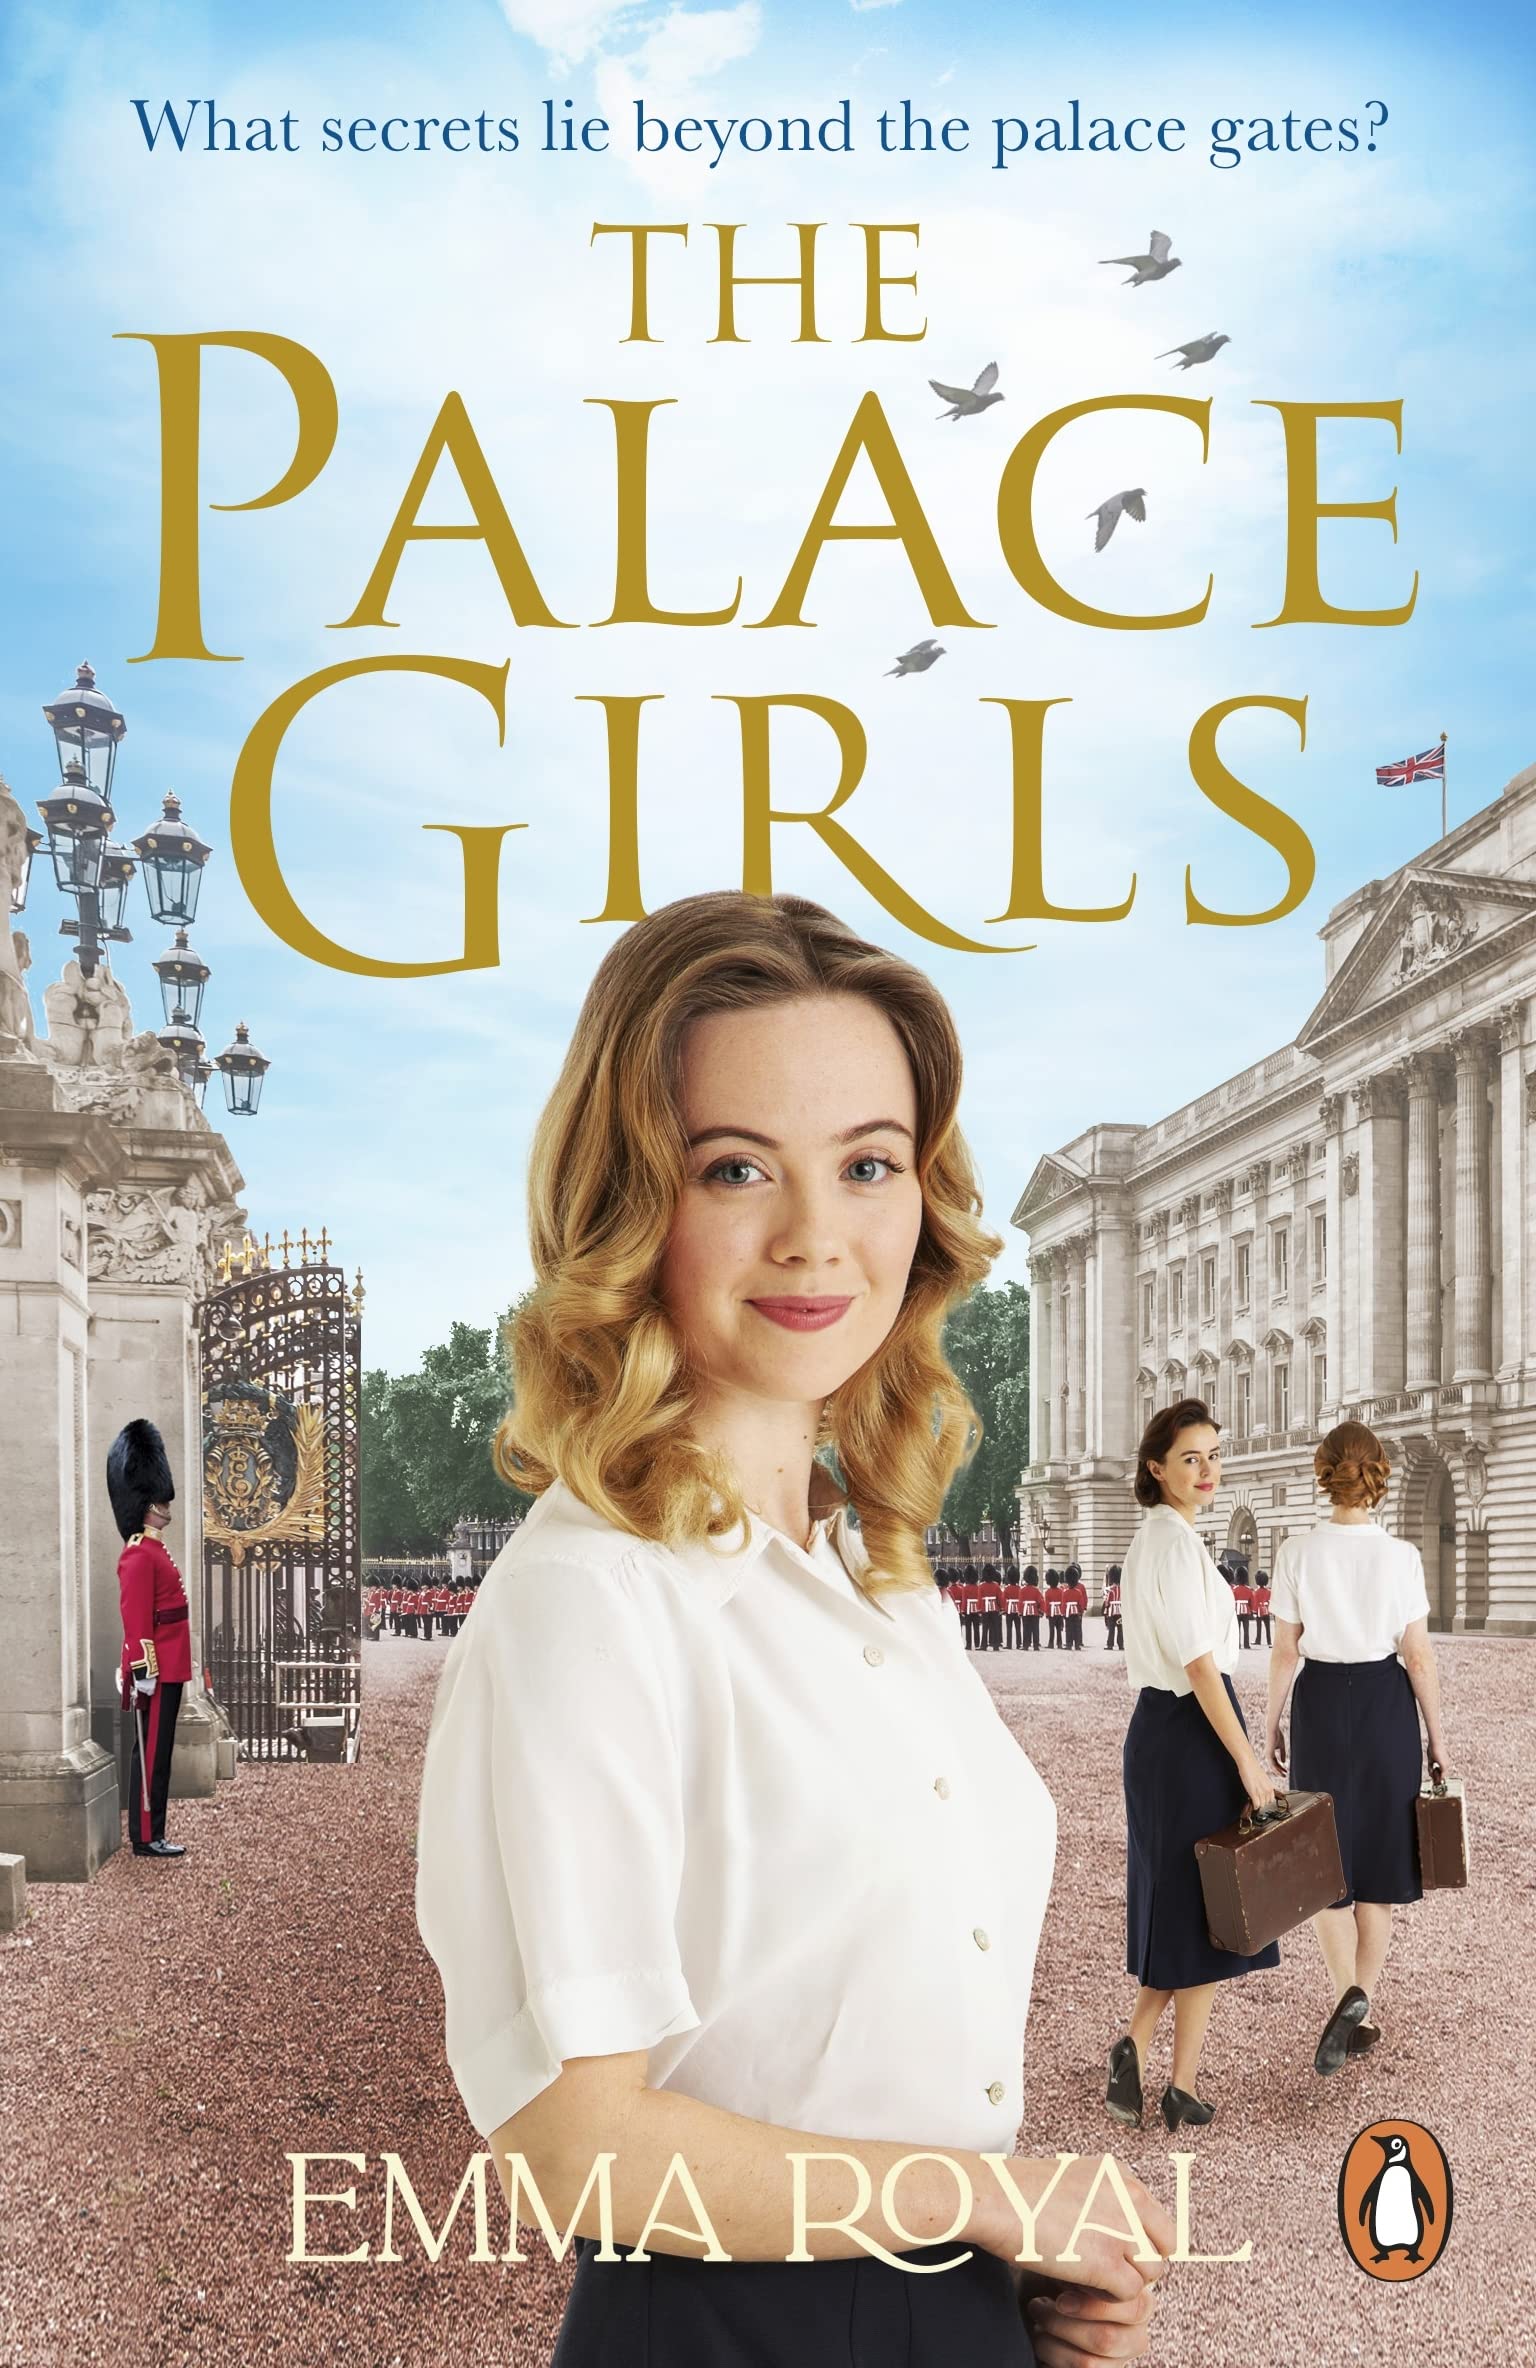 The_Palace_Girls_book_cover